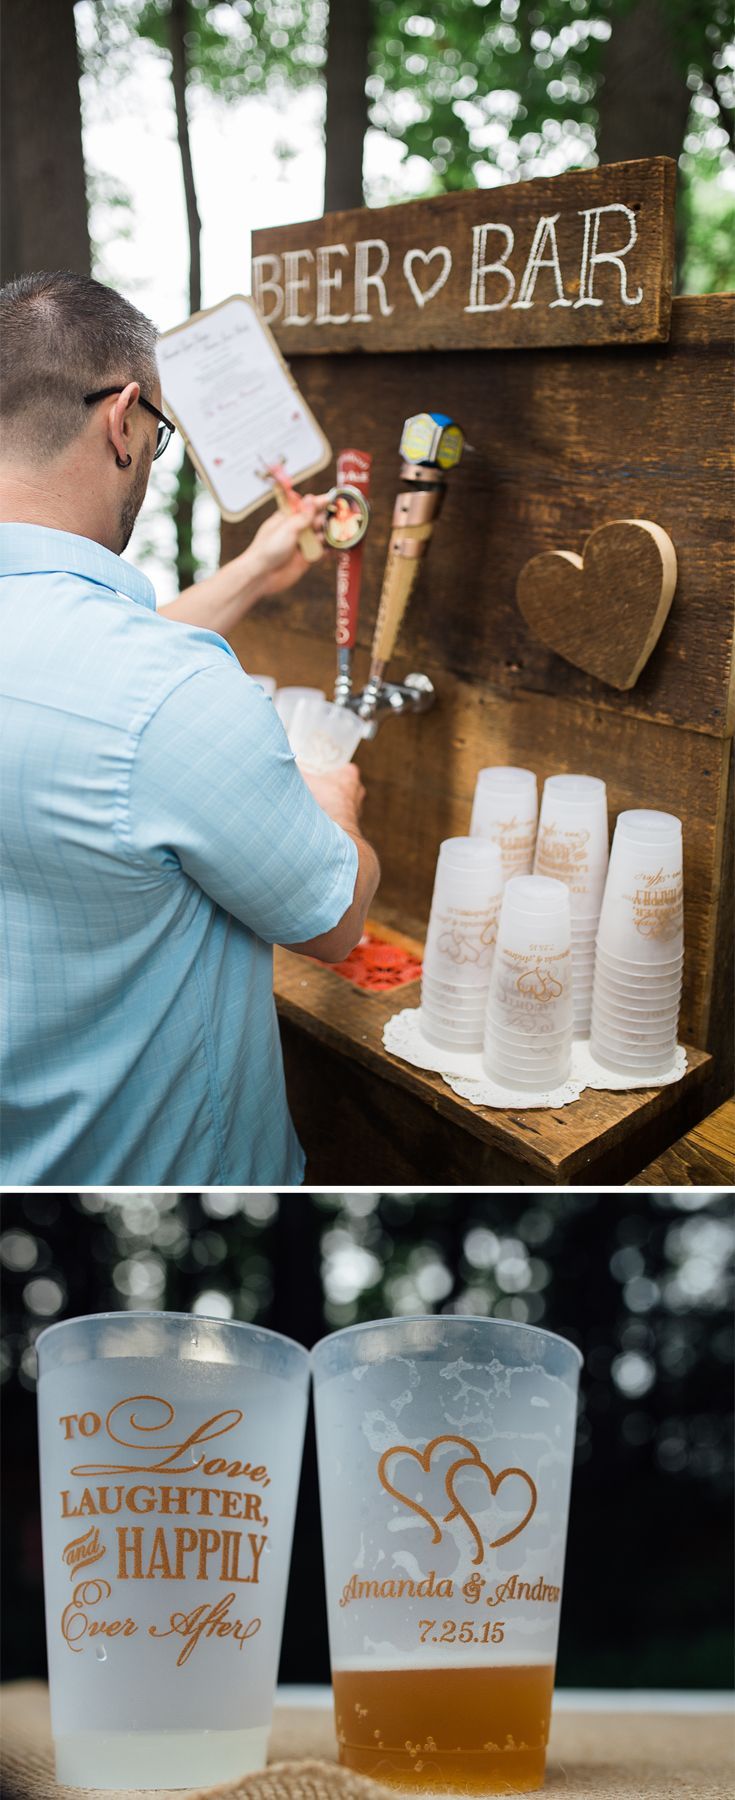 For their rustic DIY outdoor wedding reception, Amanda and Brian created a beer bar drink station complete with 24 ounce frosted